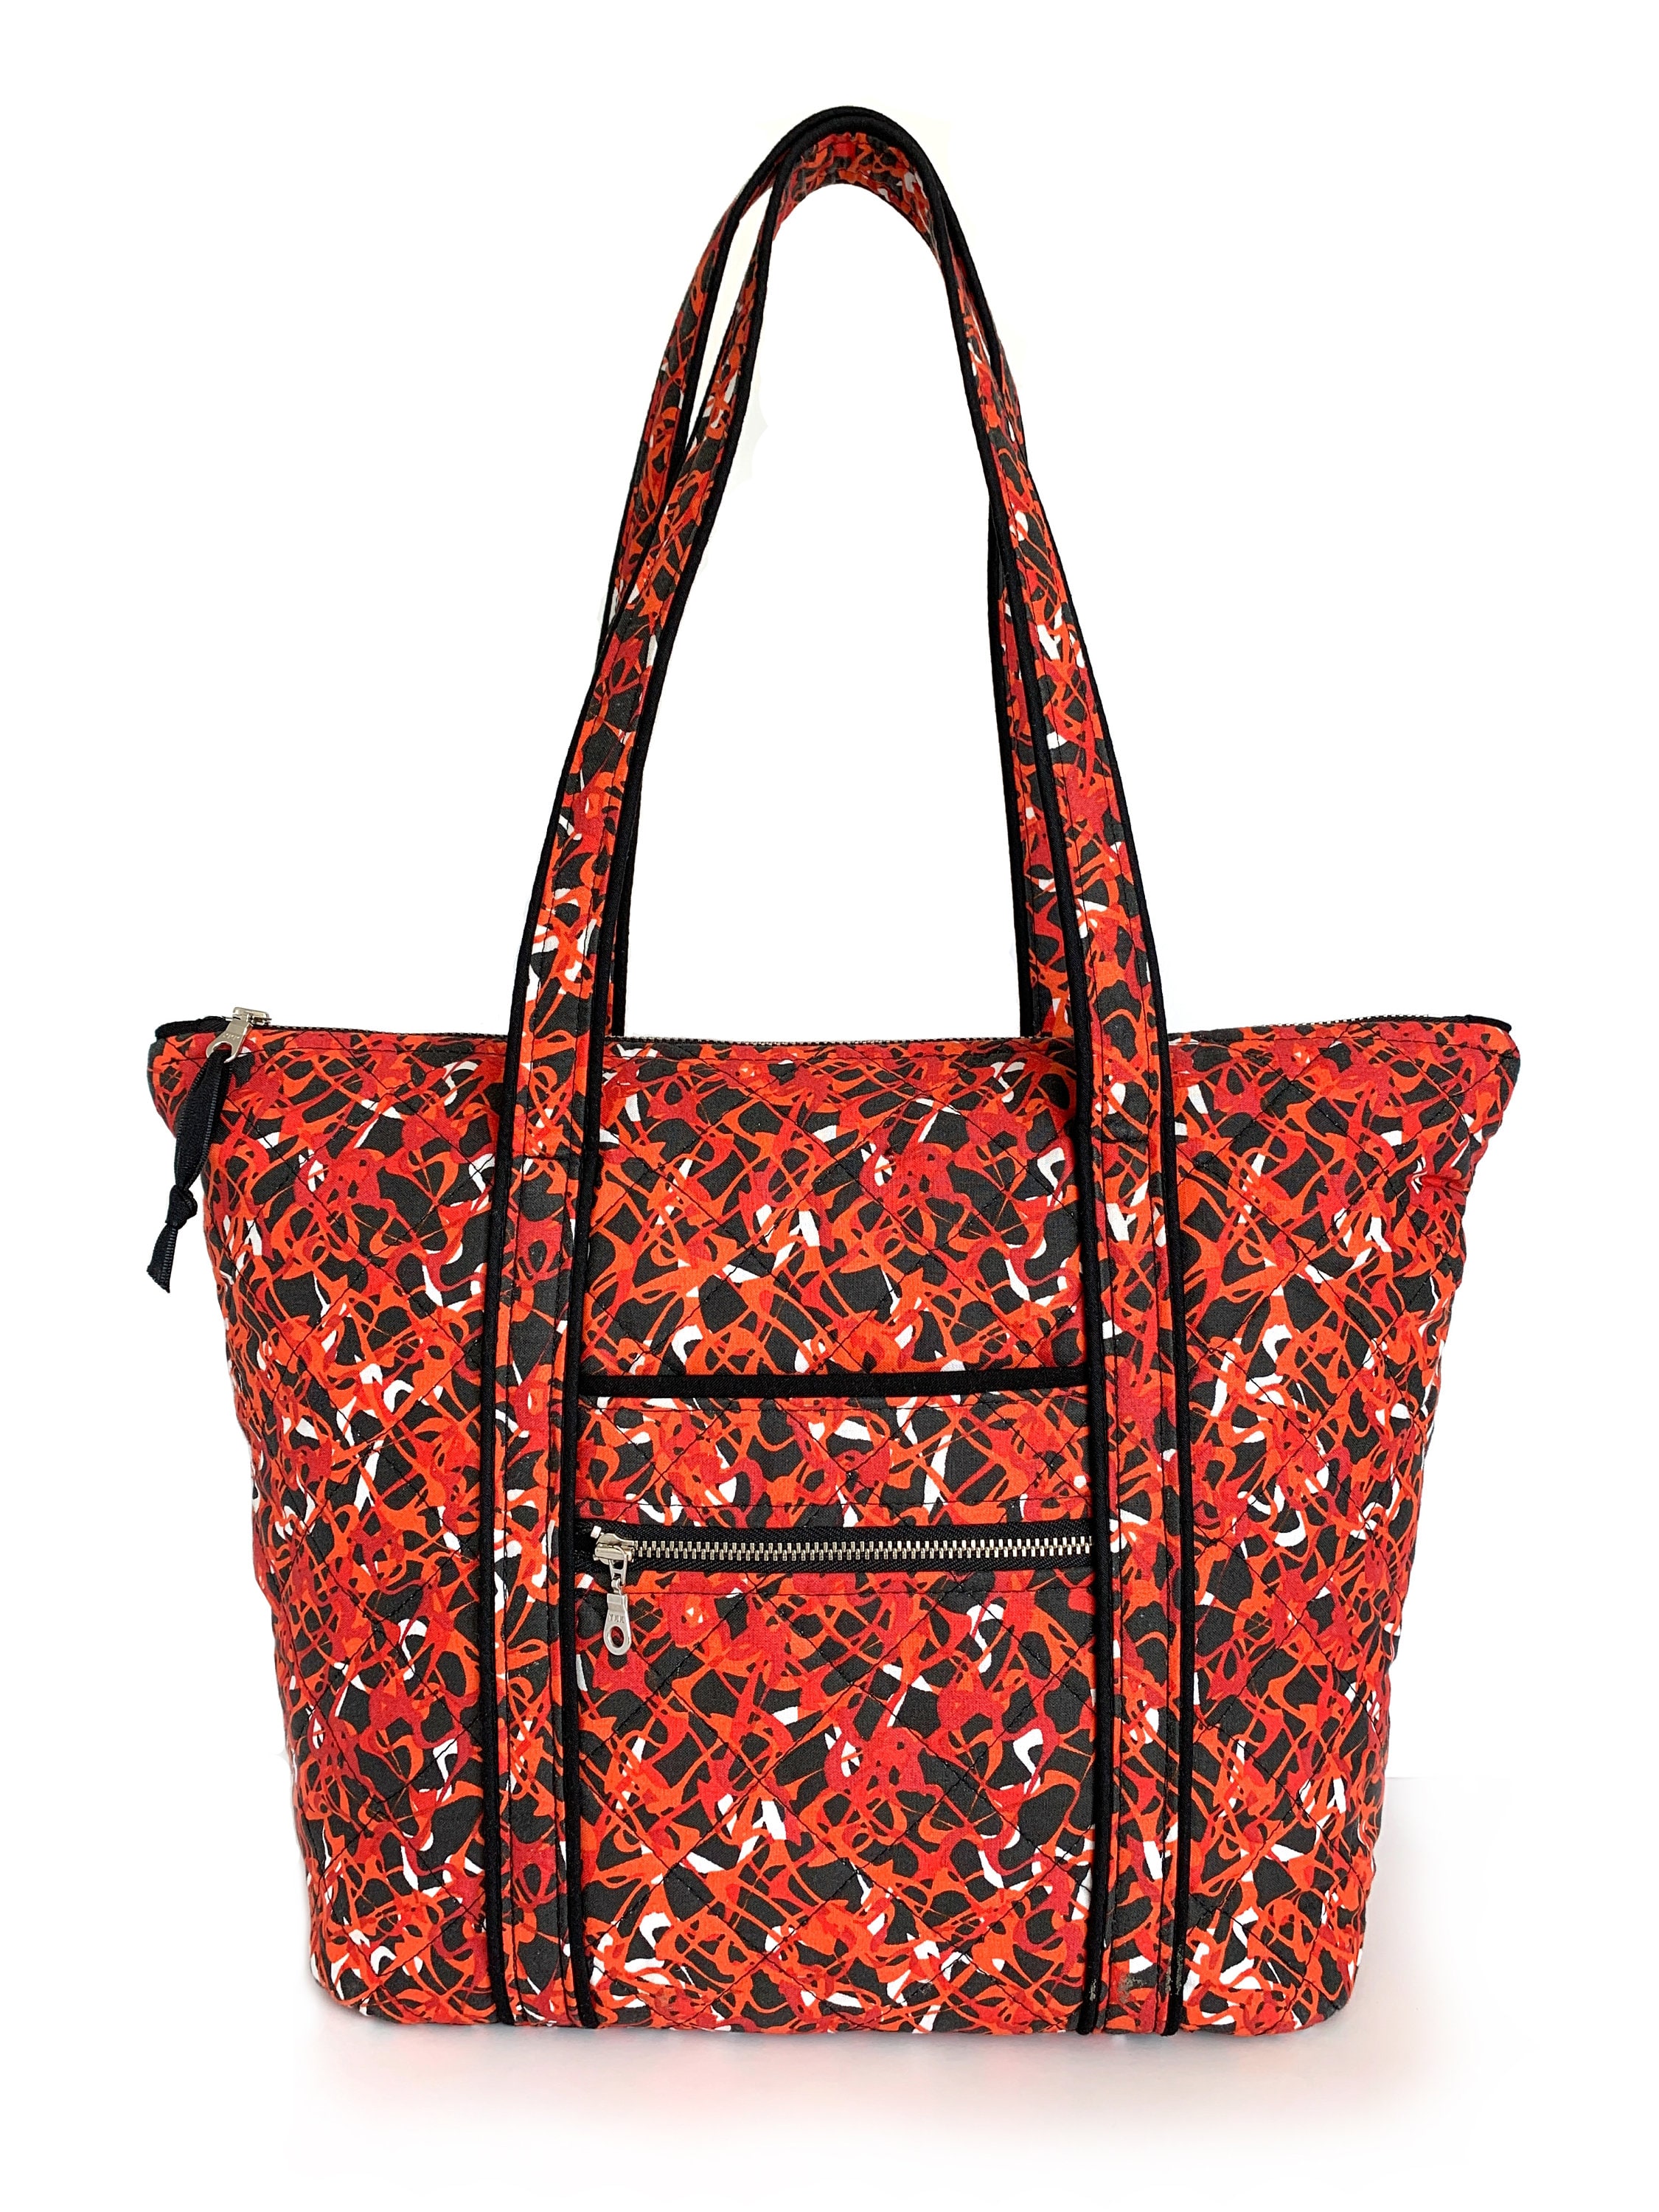 FROMBEGINNING - Padded Tote Bag with Strap